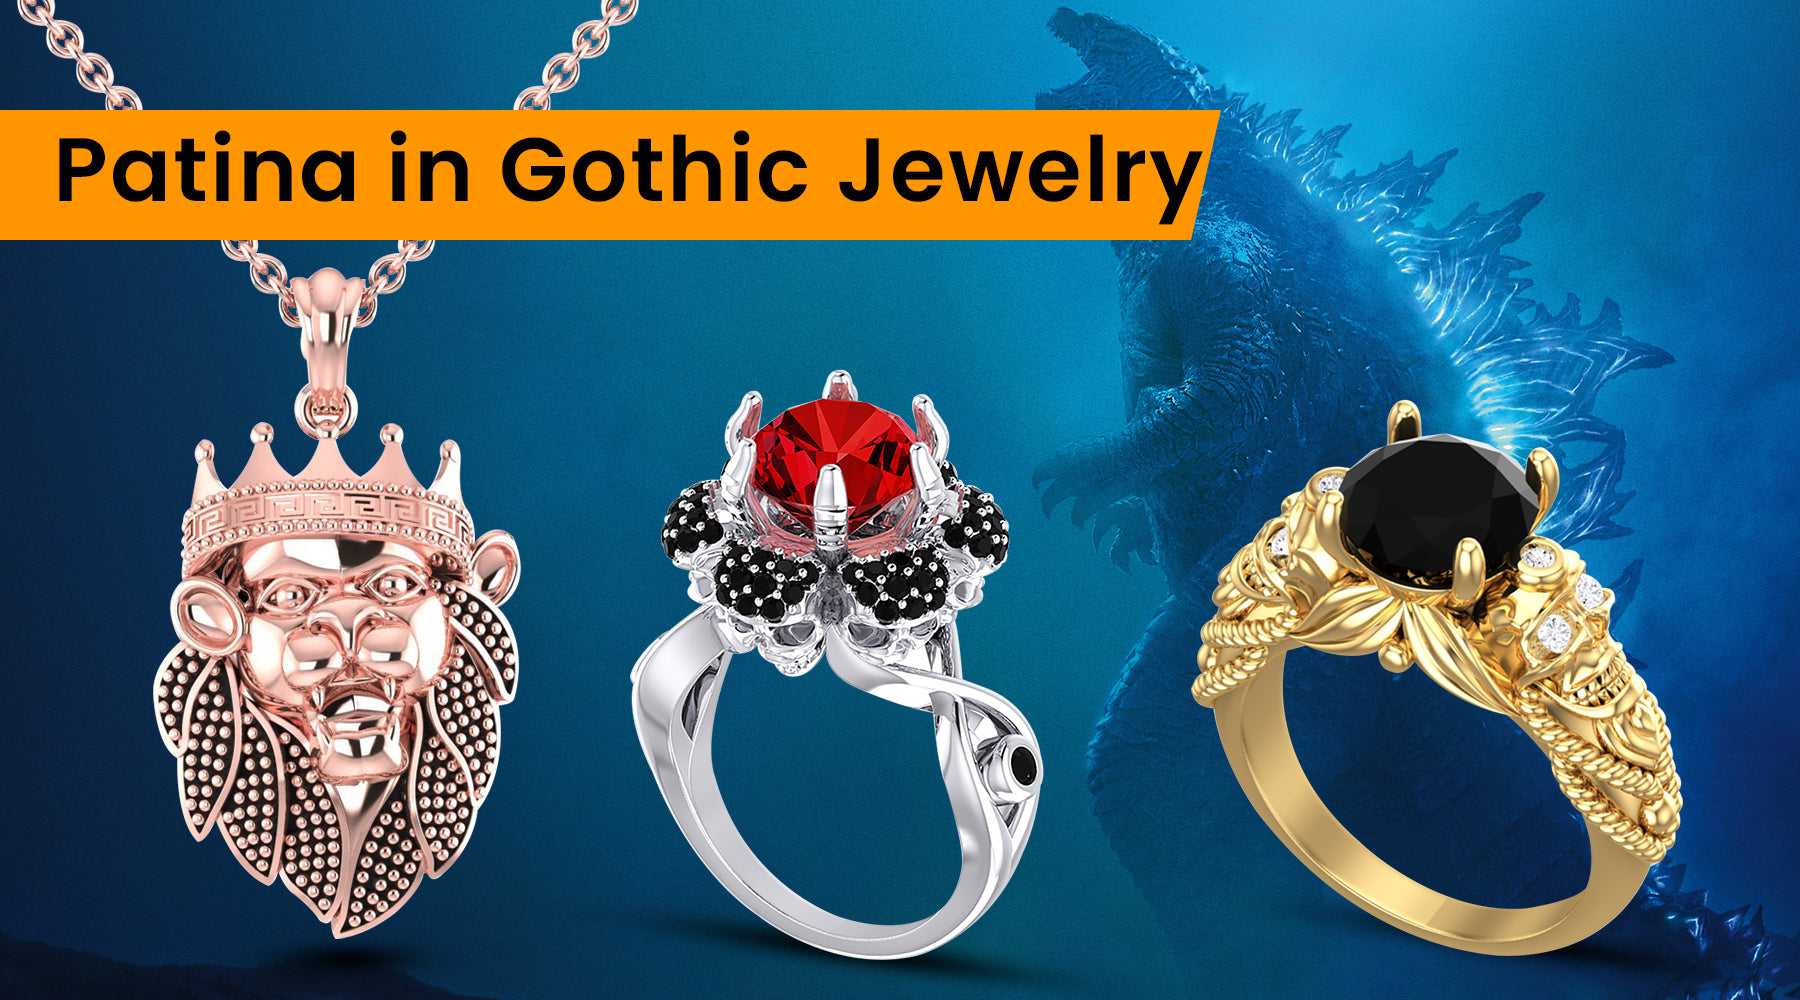 The Art of Patina in Gothic Jewelry